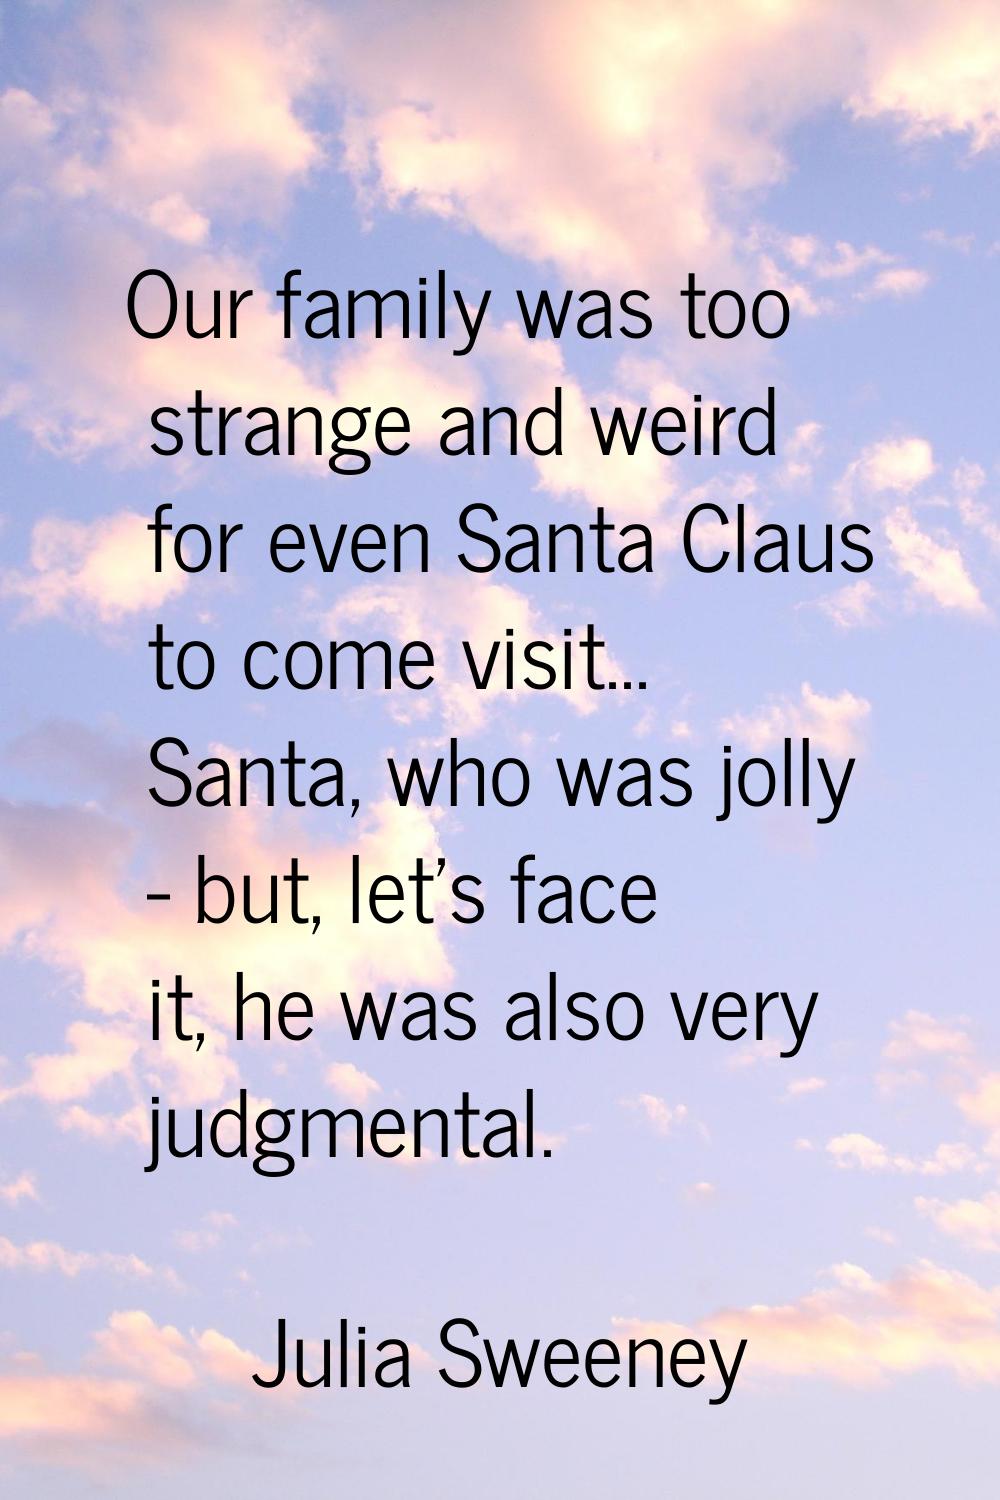 Our family was too strange and weird for even Santa Claus to come visit... Santa, who was jolly - b